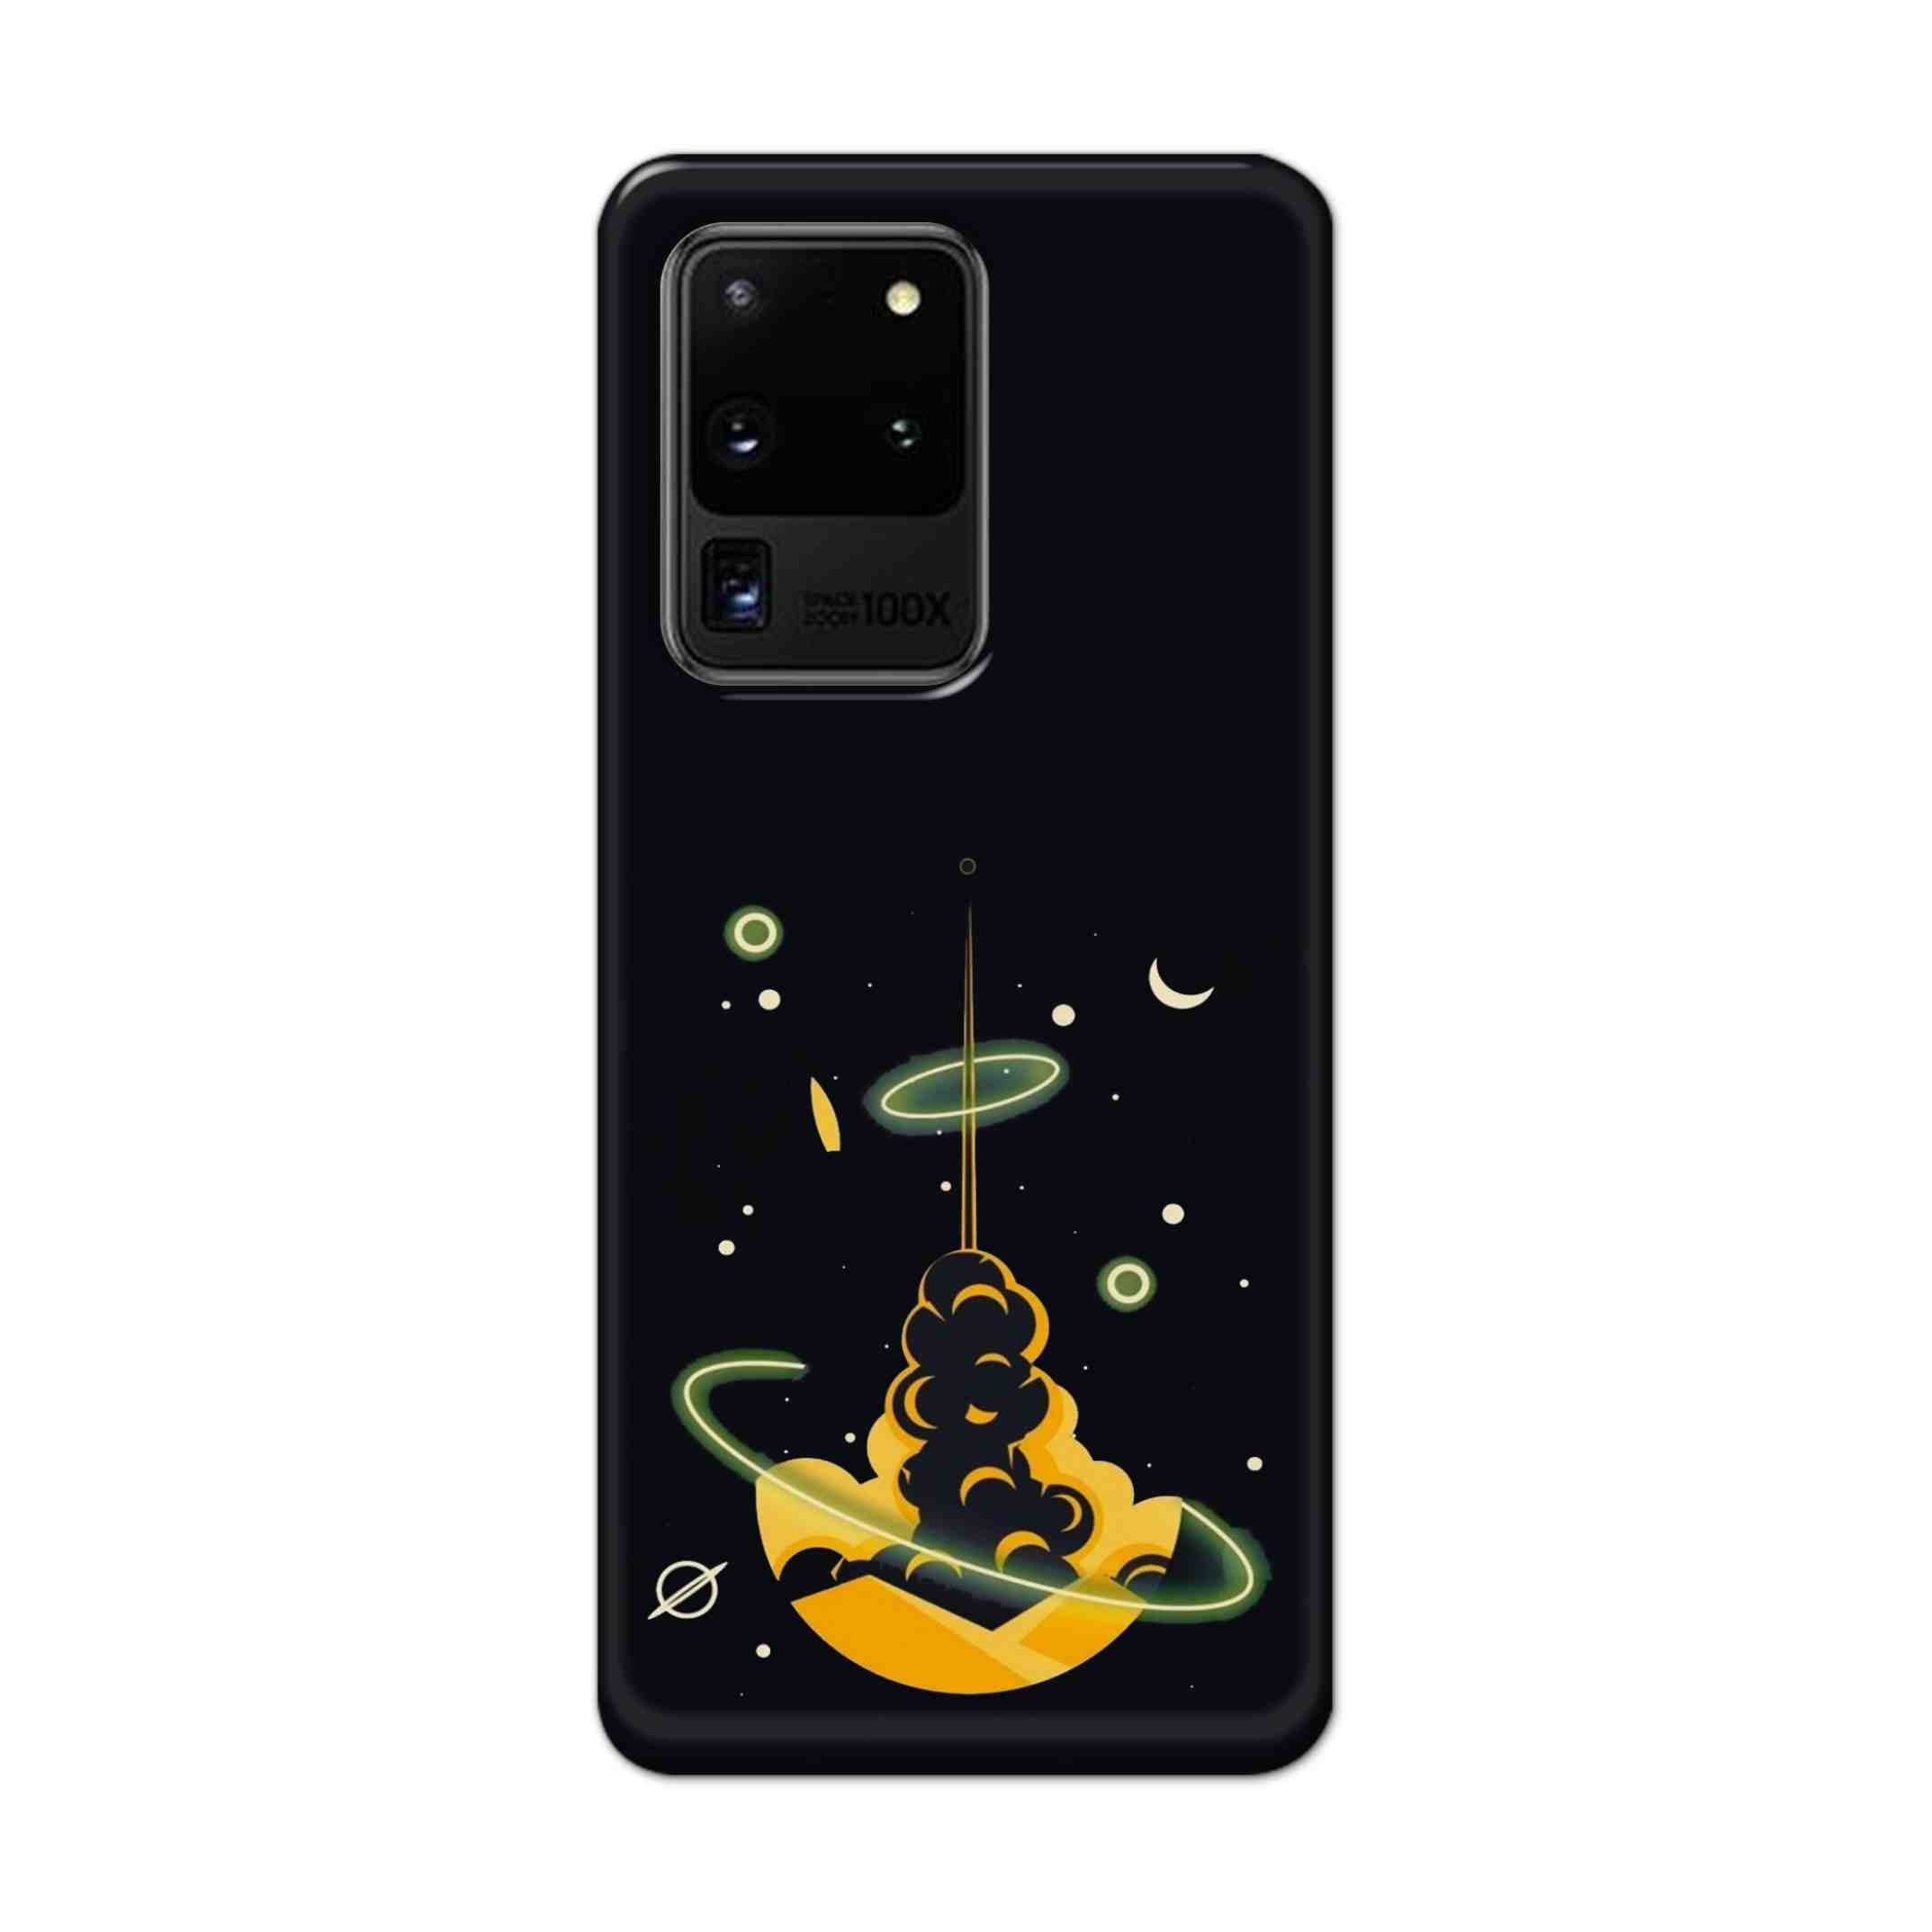 Buy Moon Hard Back Mobile Phone Case Cover For Samsung Galaxy S20 Ultra Online